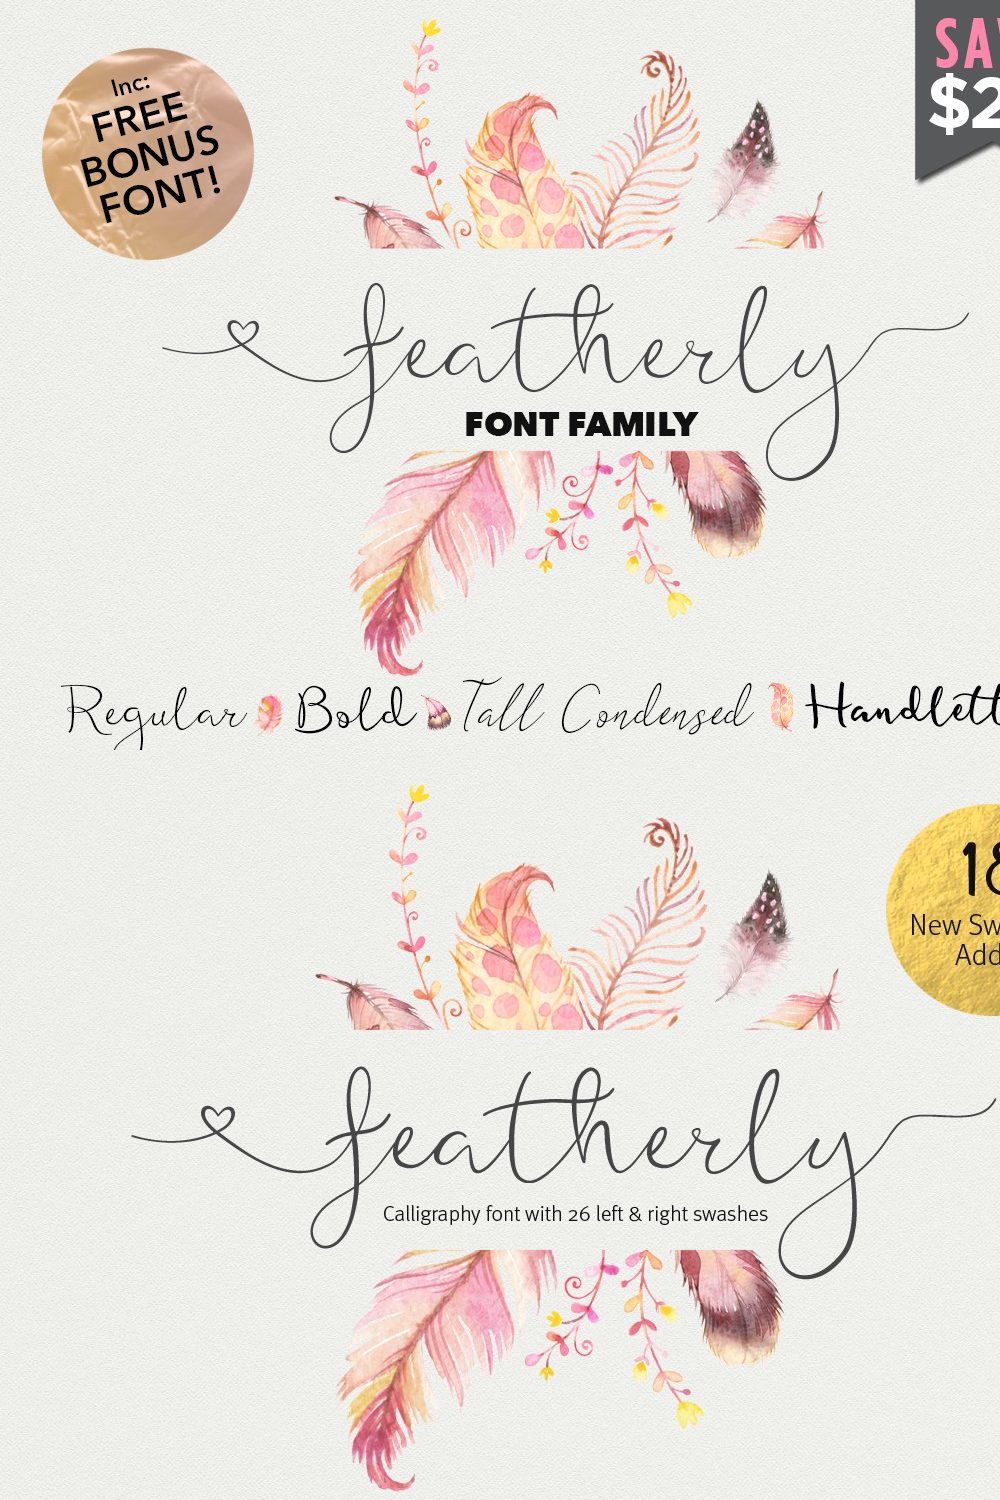 Featherly Font Family pinterest preview image.